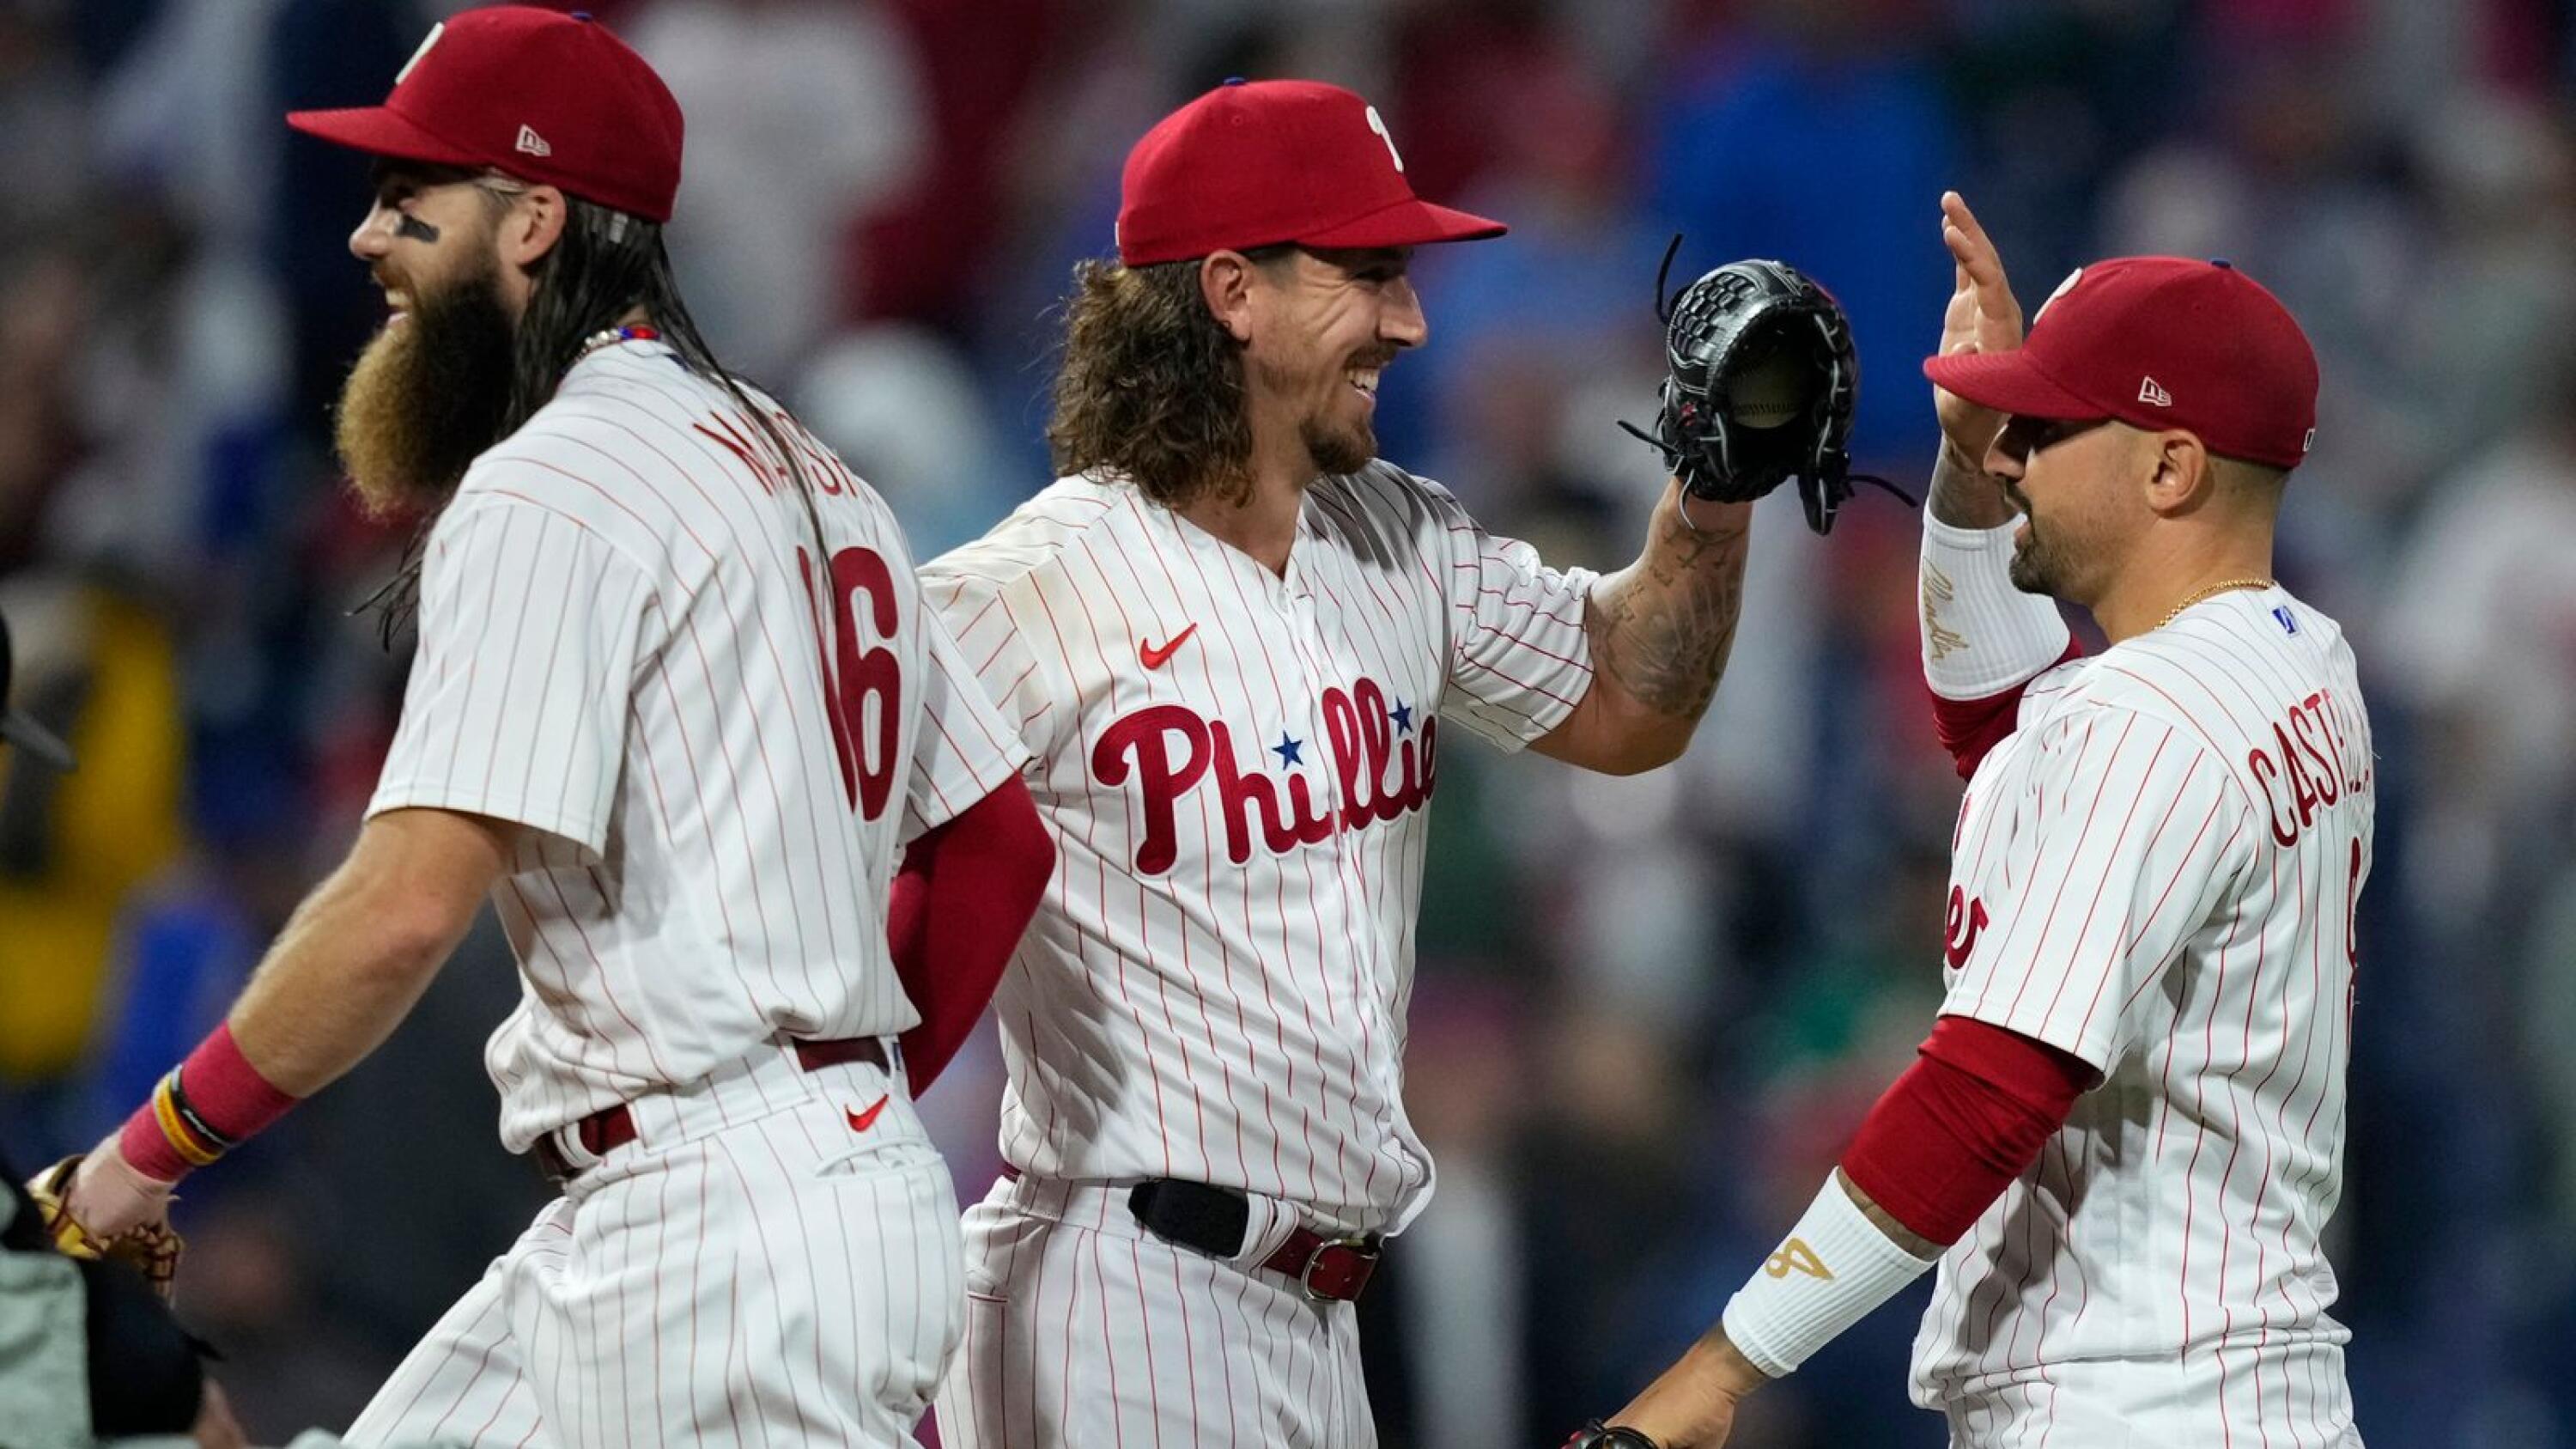 Phillies pushing hard for 1st playoff berth since 2011